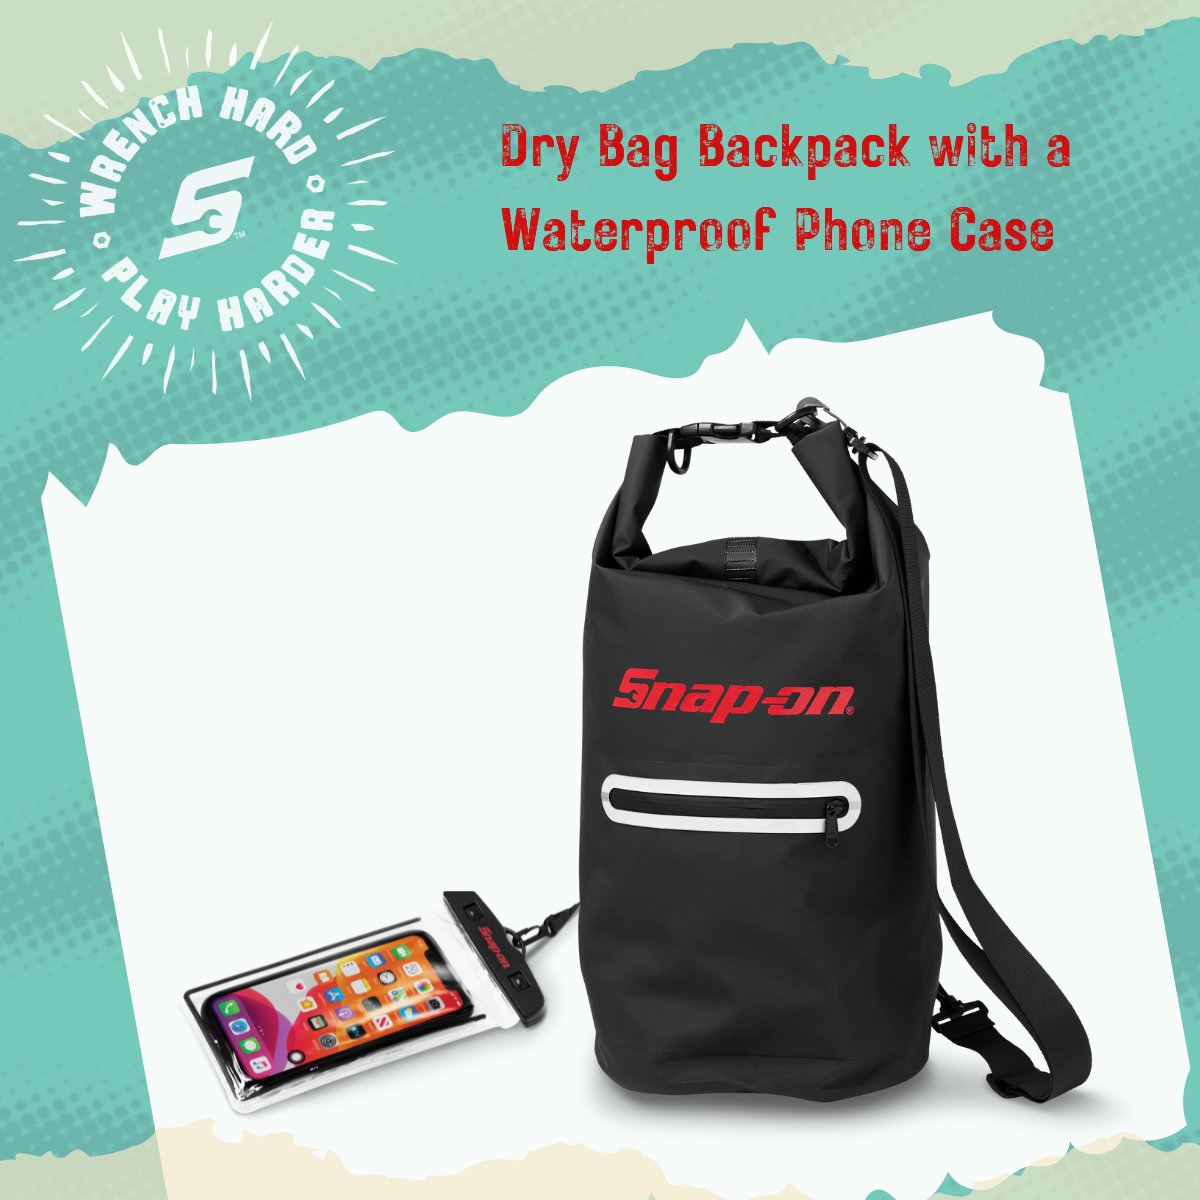 #FreebieFriday! Tag your Snappy rep with what you need for your chance to randomly win  Dry Bag Backpack with a Waterproof Phone Case OR a Vintage Cooler!